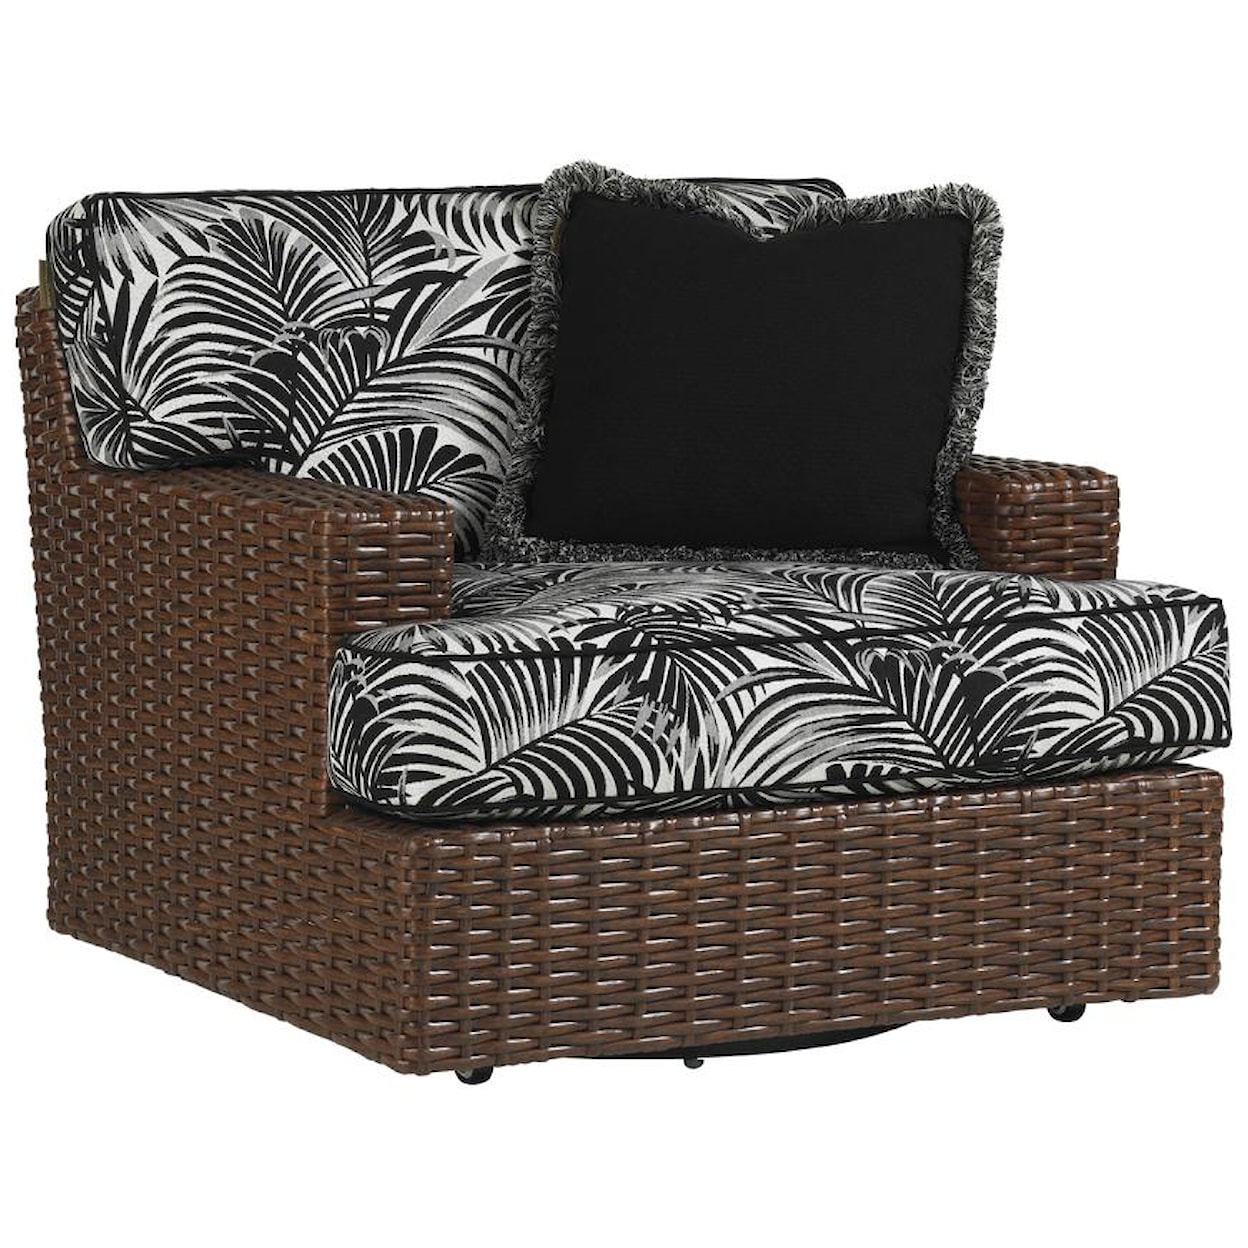 Tommy Bahama Outdoor Living Ocean Club Pacifica Swivel Lounge Chair